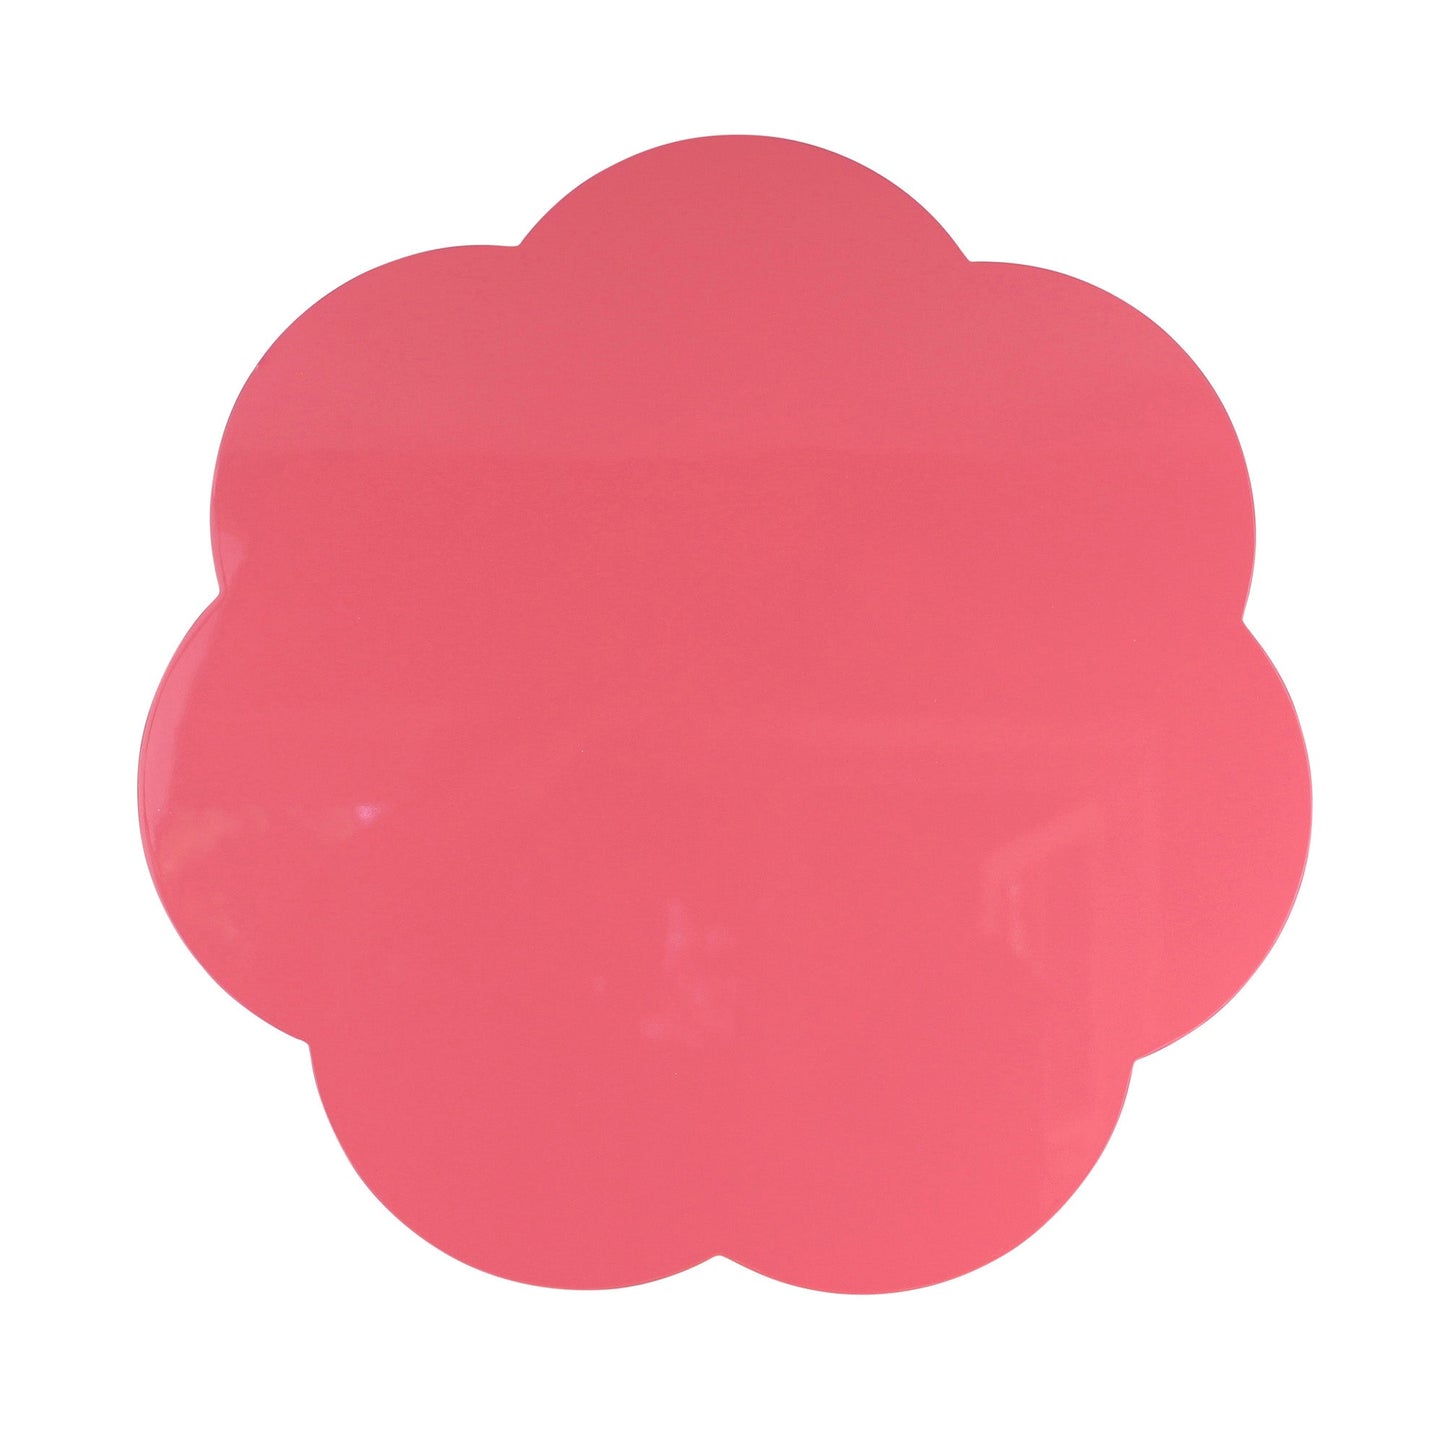 Watermelon Pink Large Scallop Lacquer Placemats – Set of 4